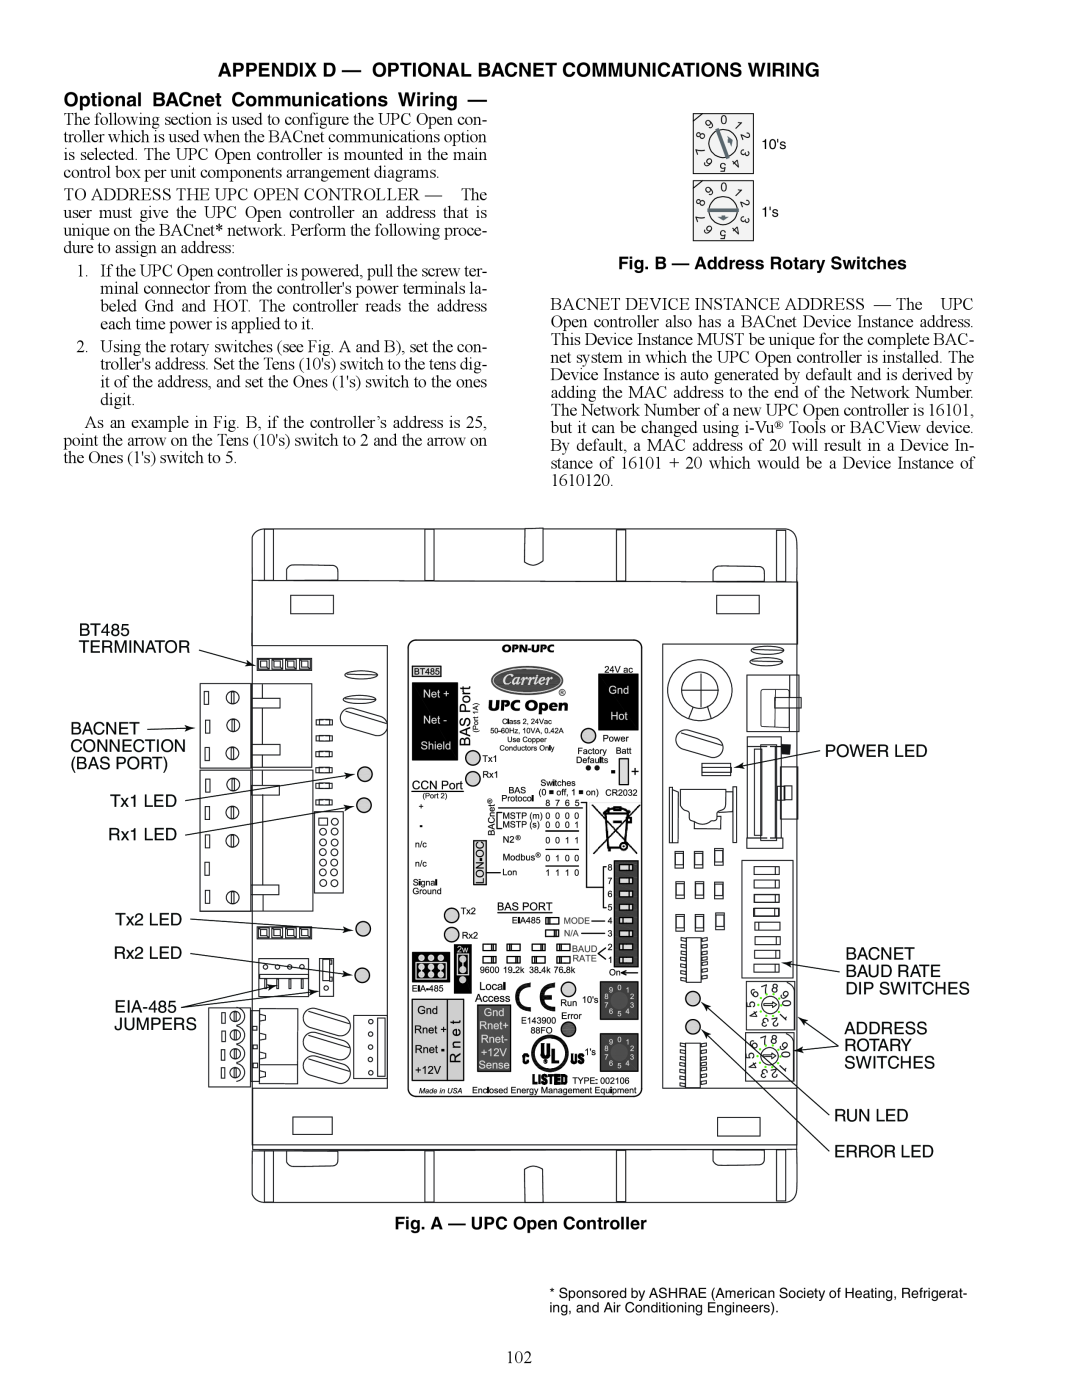 Carrier 30RAP010-060 Optional BACnet Communications Wiring, Fig. B — Address Rotary Switches, Fig. A — UPC Open Controller 